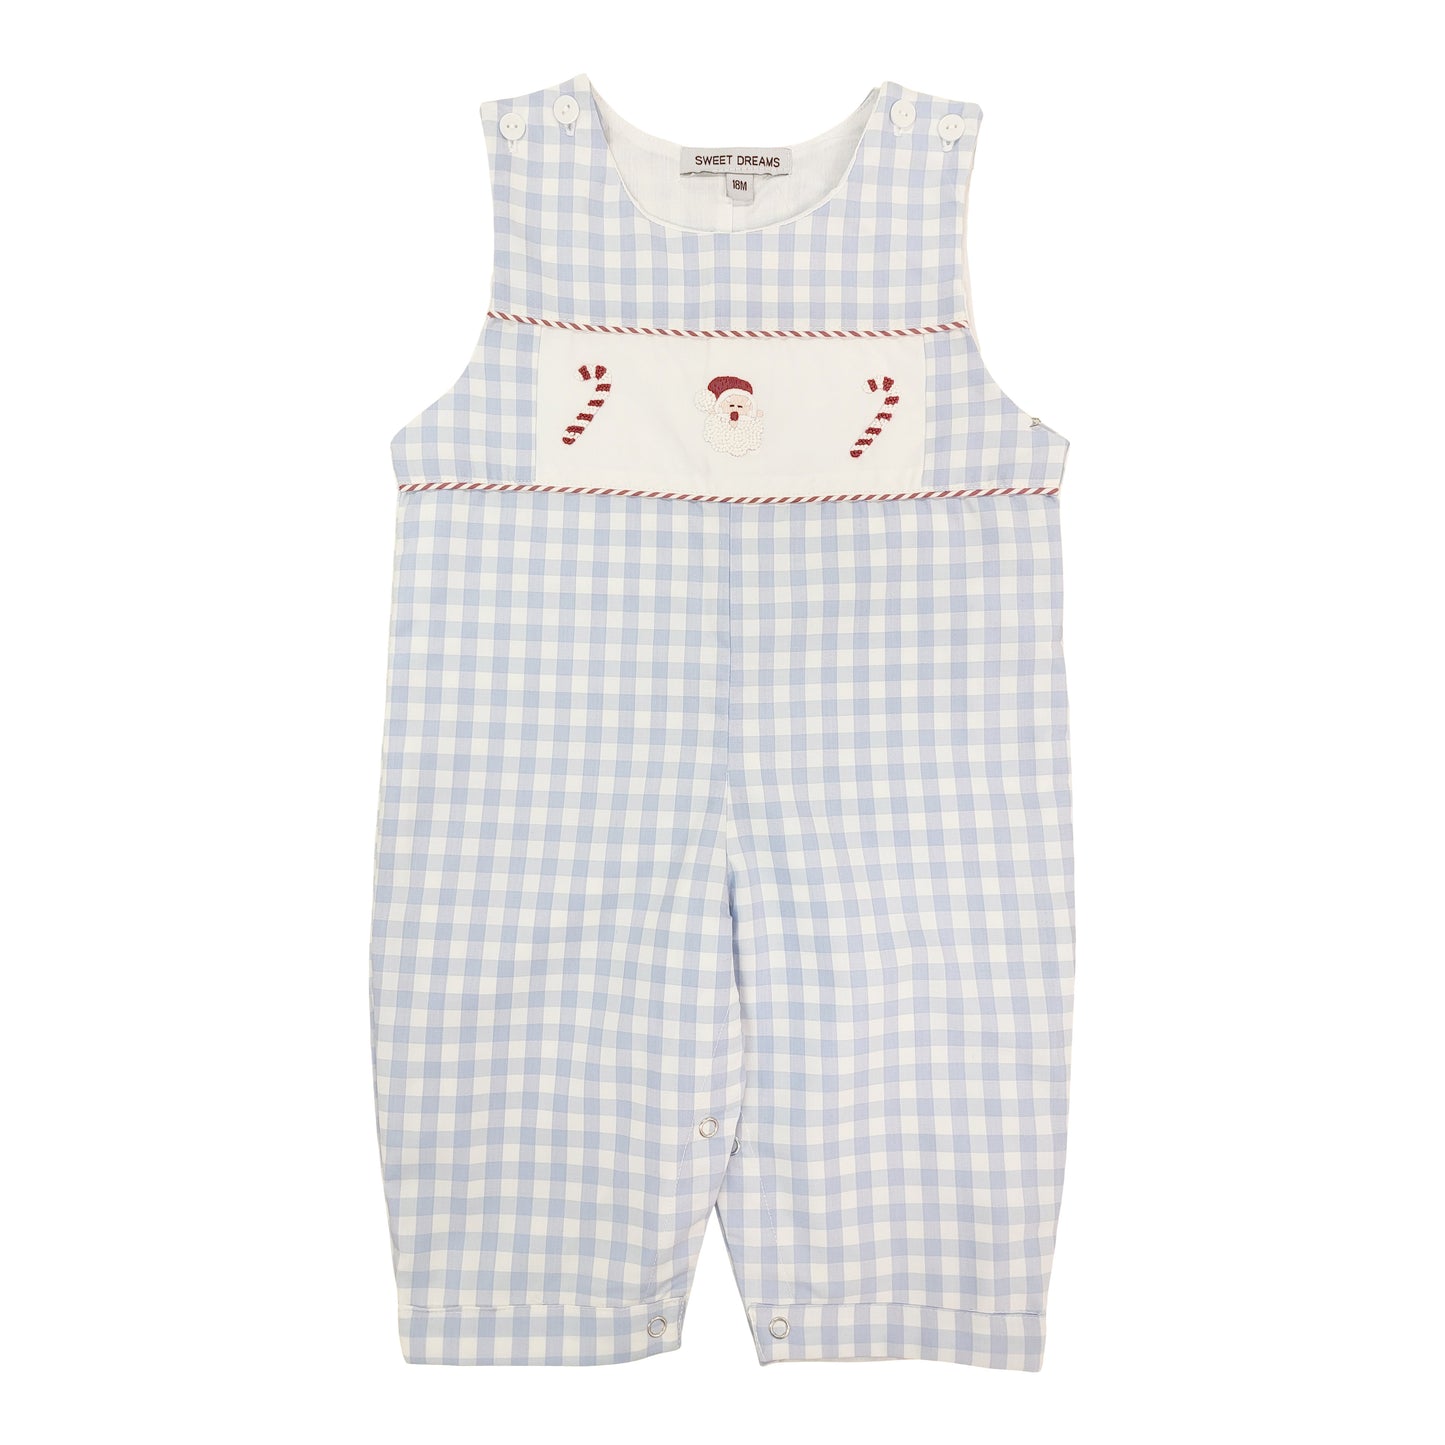 Sweet Dreams blue gingham longall with candy cane and Santa accents. 